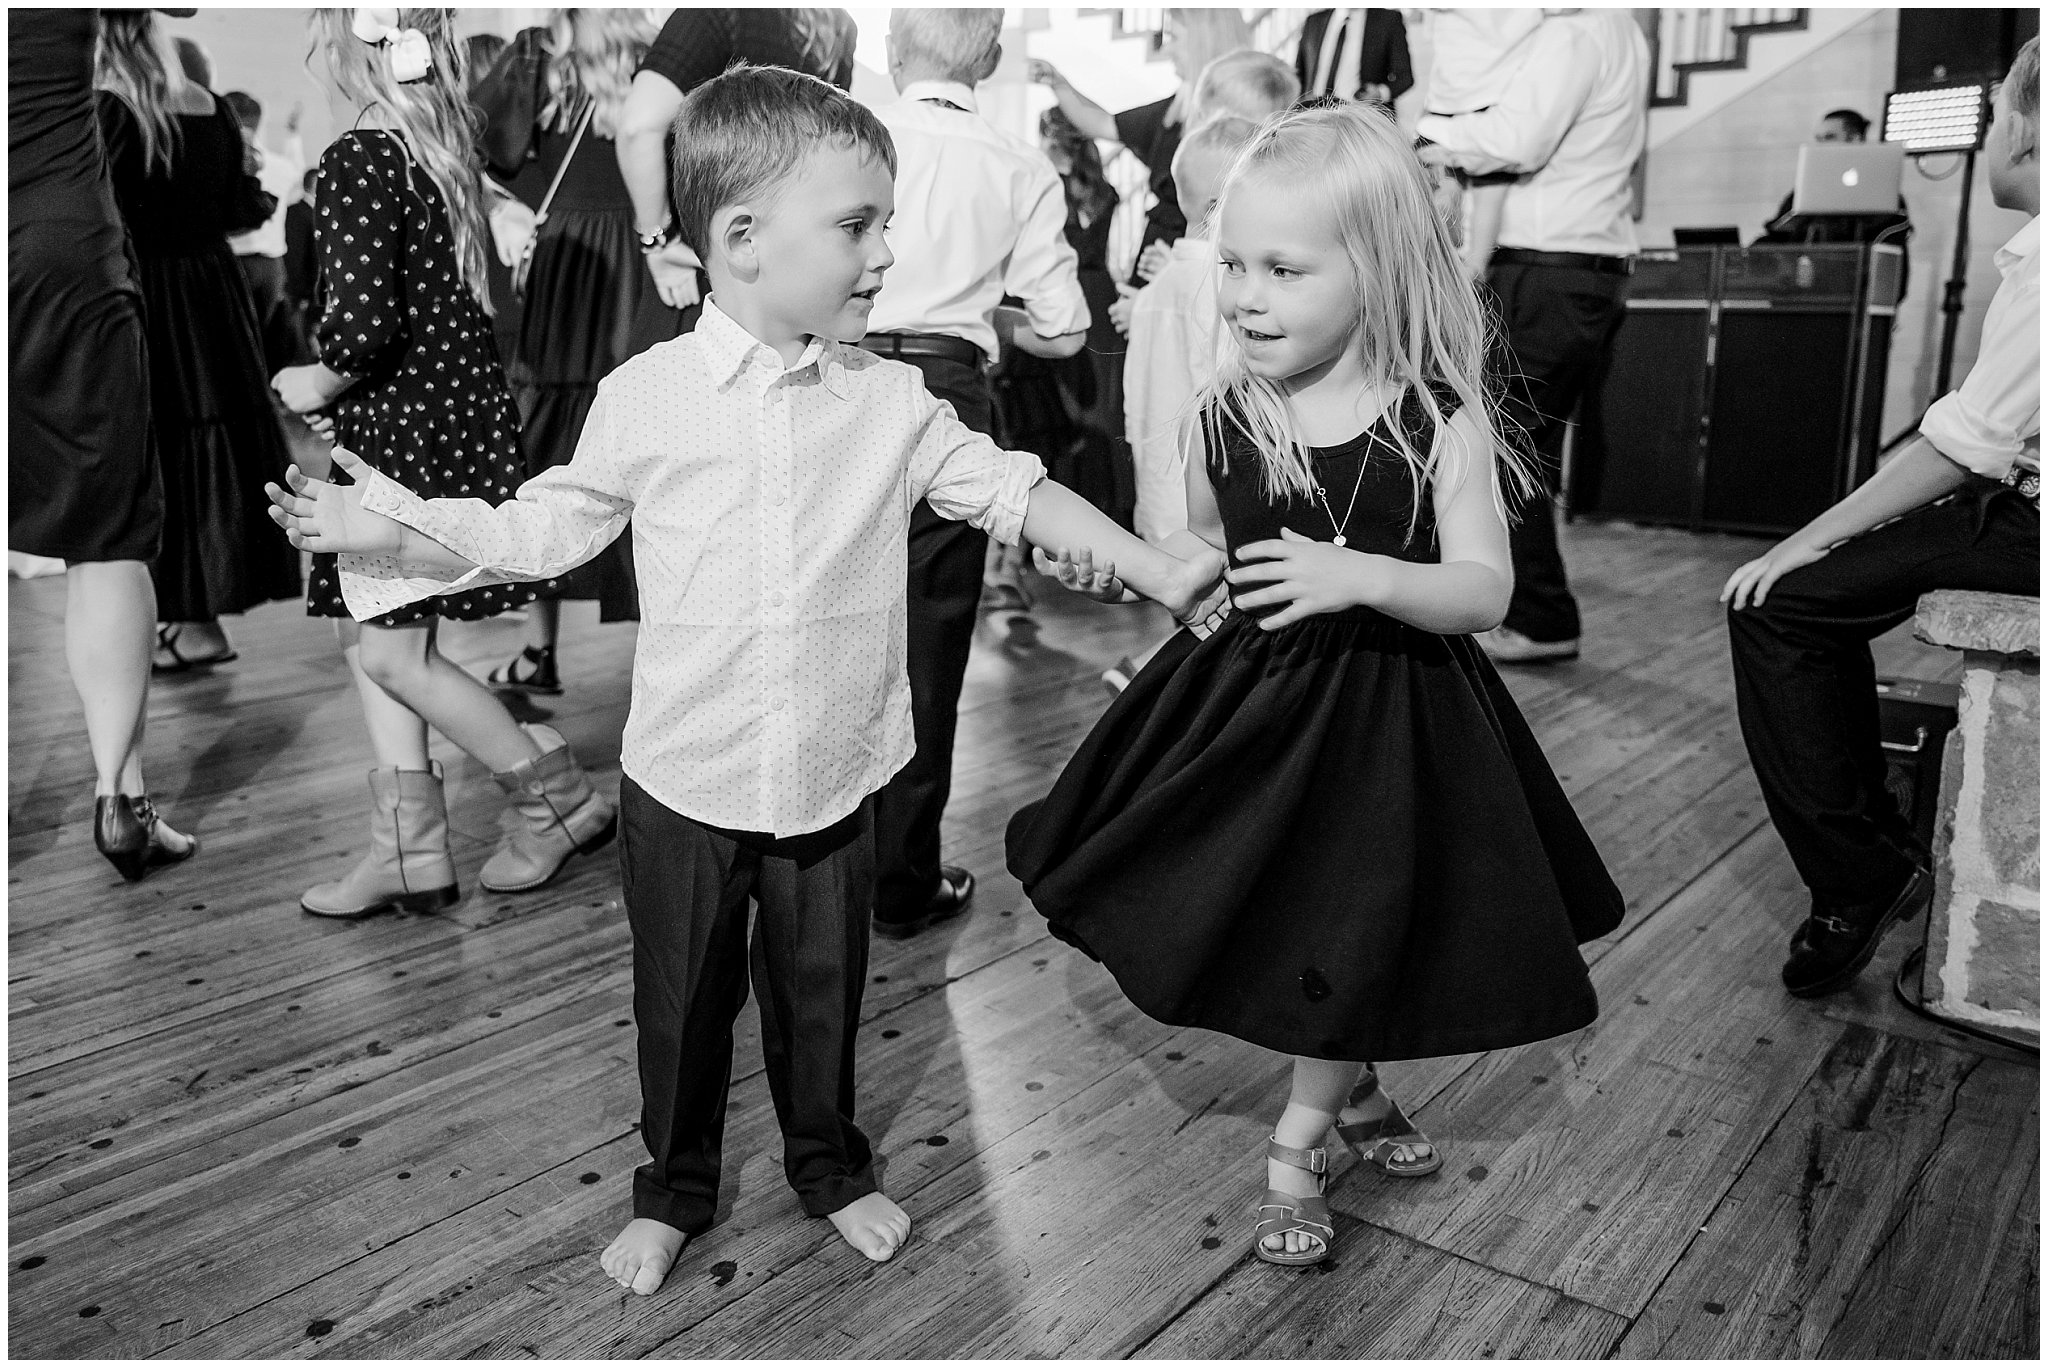 Wedding reception and dancing inside the barn at Walker Farms